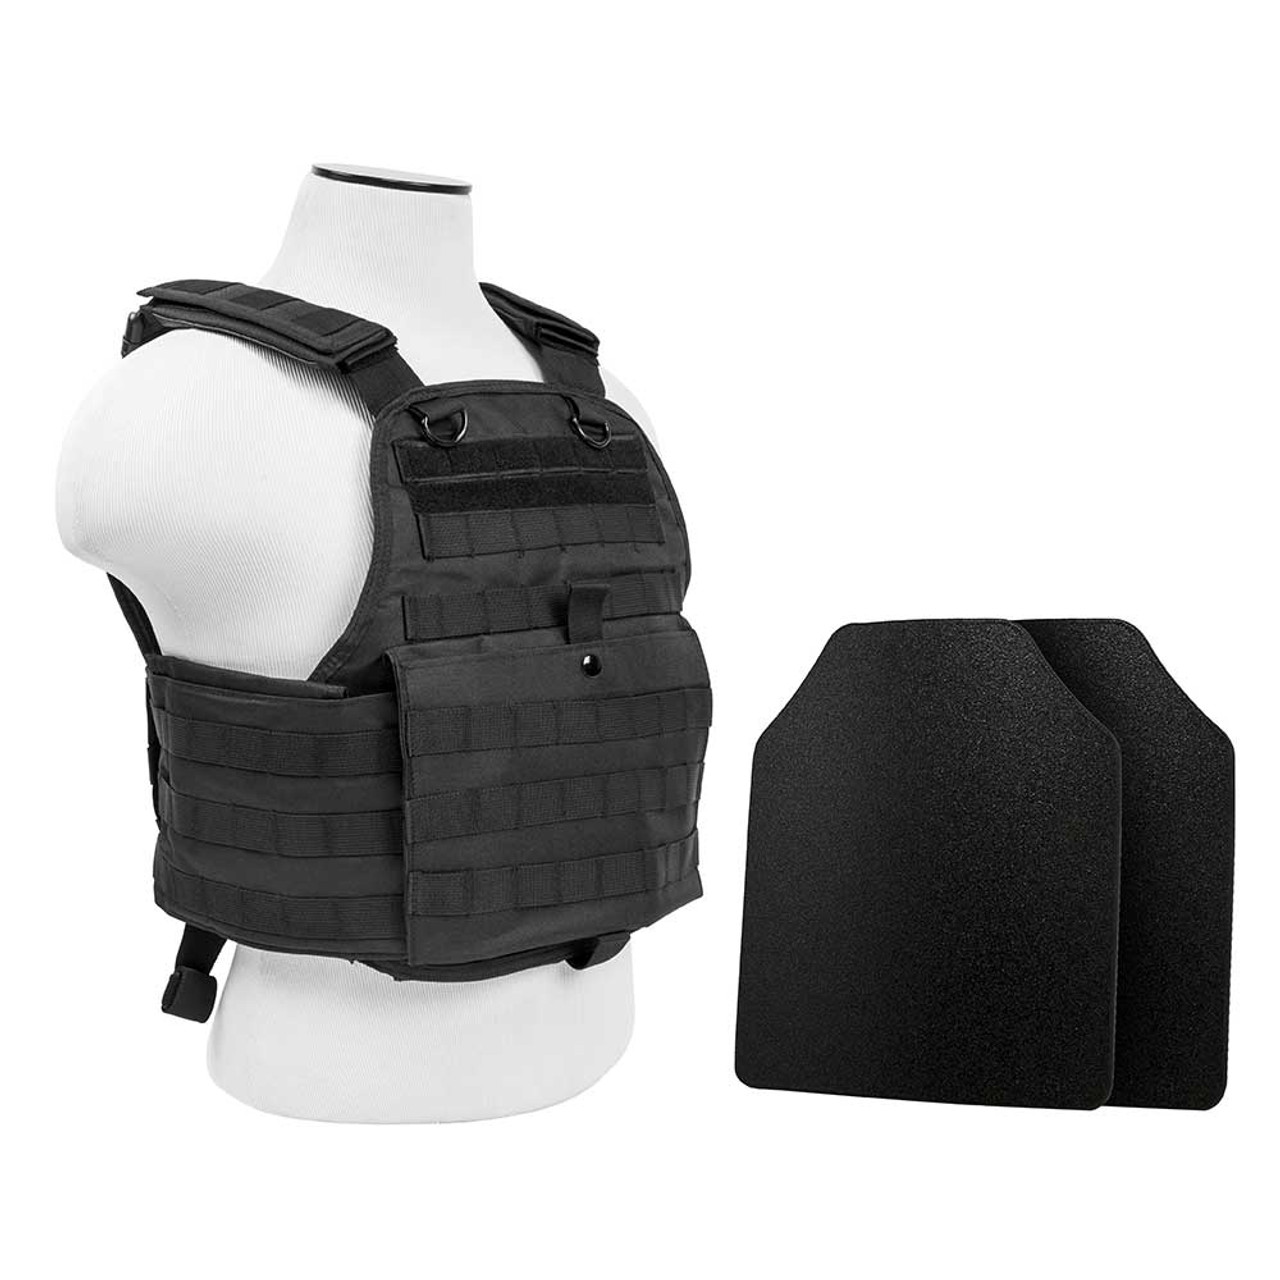 Vism By Ncstar BUCCVPCV2924B-A Plate Carrier Vest With 10"X12" Level Iiia Shooters Cut 2X Hard Ballistic Panels